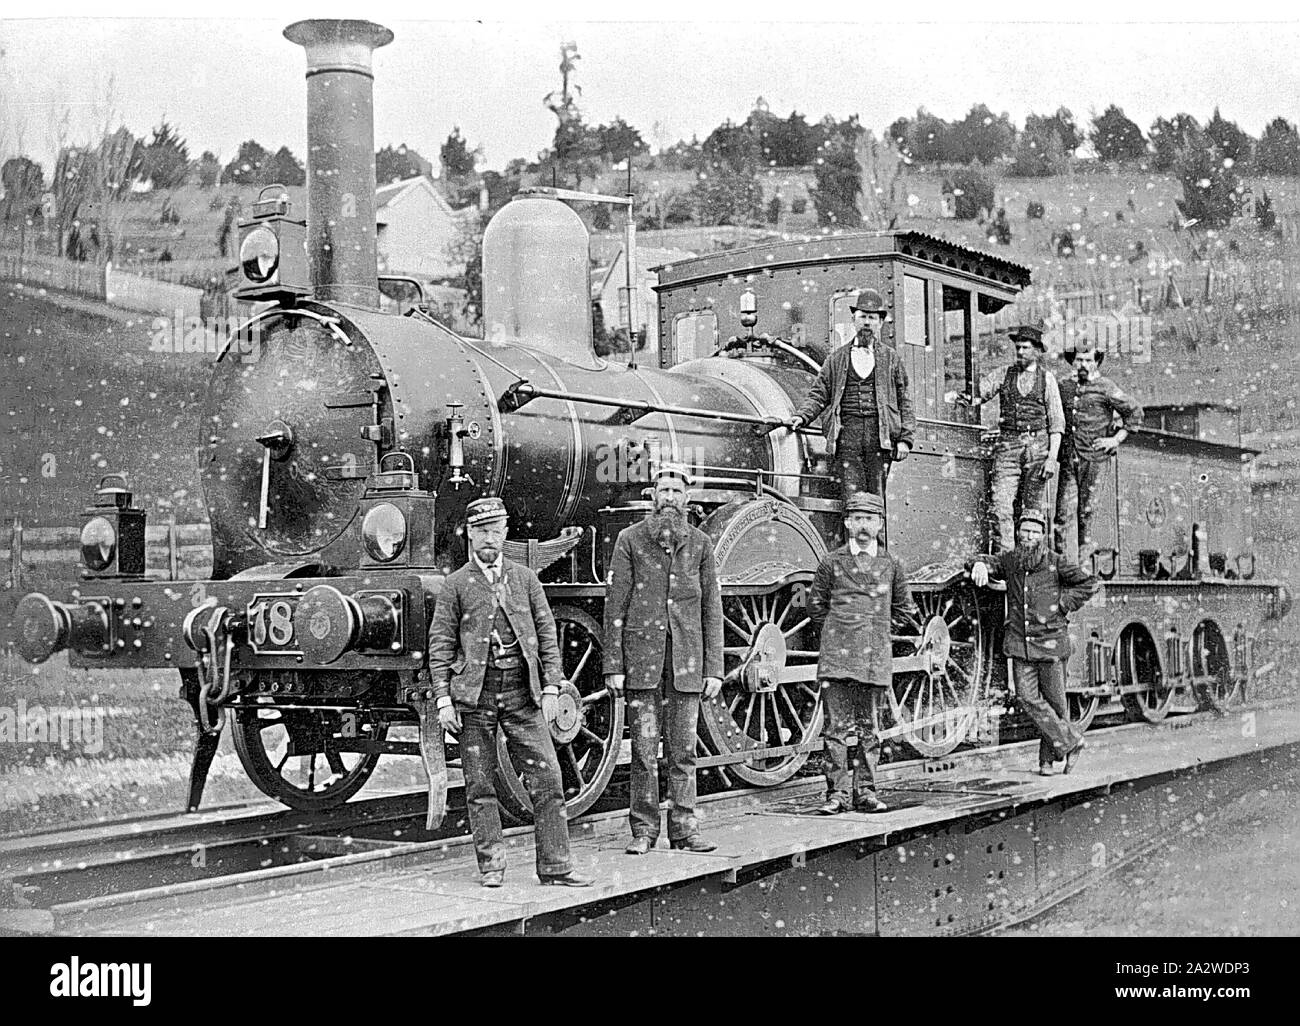 Negative - Victorian Railways F-class 2-4-0 Steam Locomotive & Crew on the Turntable, Daylesford, Victoria, 1890, Copy of a black & white photograph depicting one of the 2-4-0 type steam passenger locomotives built by the Phoenix Foundry, of Ballarat, during the late 1870s, for use on the country branch lines or 'light lines' that were built throughout central Victoria between 1873 and 1893. The engines were built in two batches Nos.126-144 (even numbers only), which went into service in 1876-77 Stock Photo